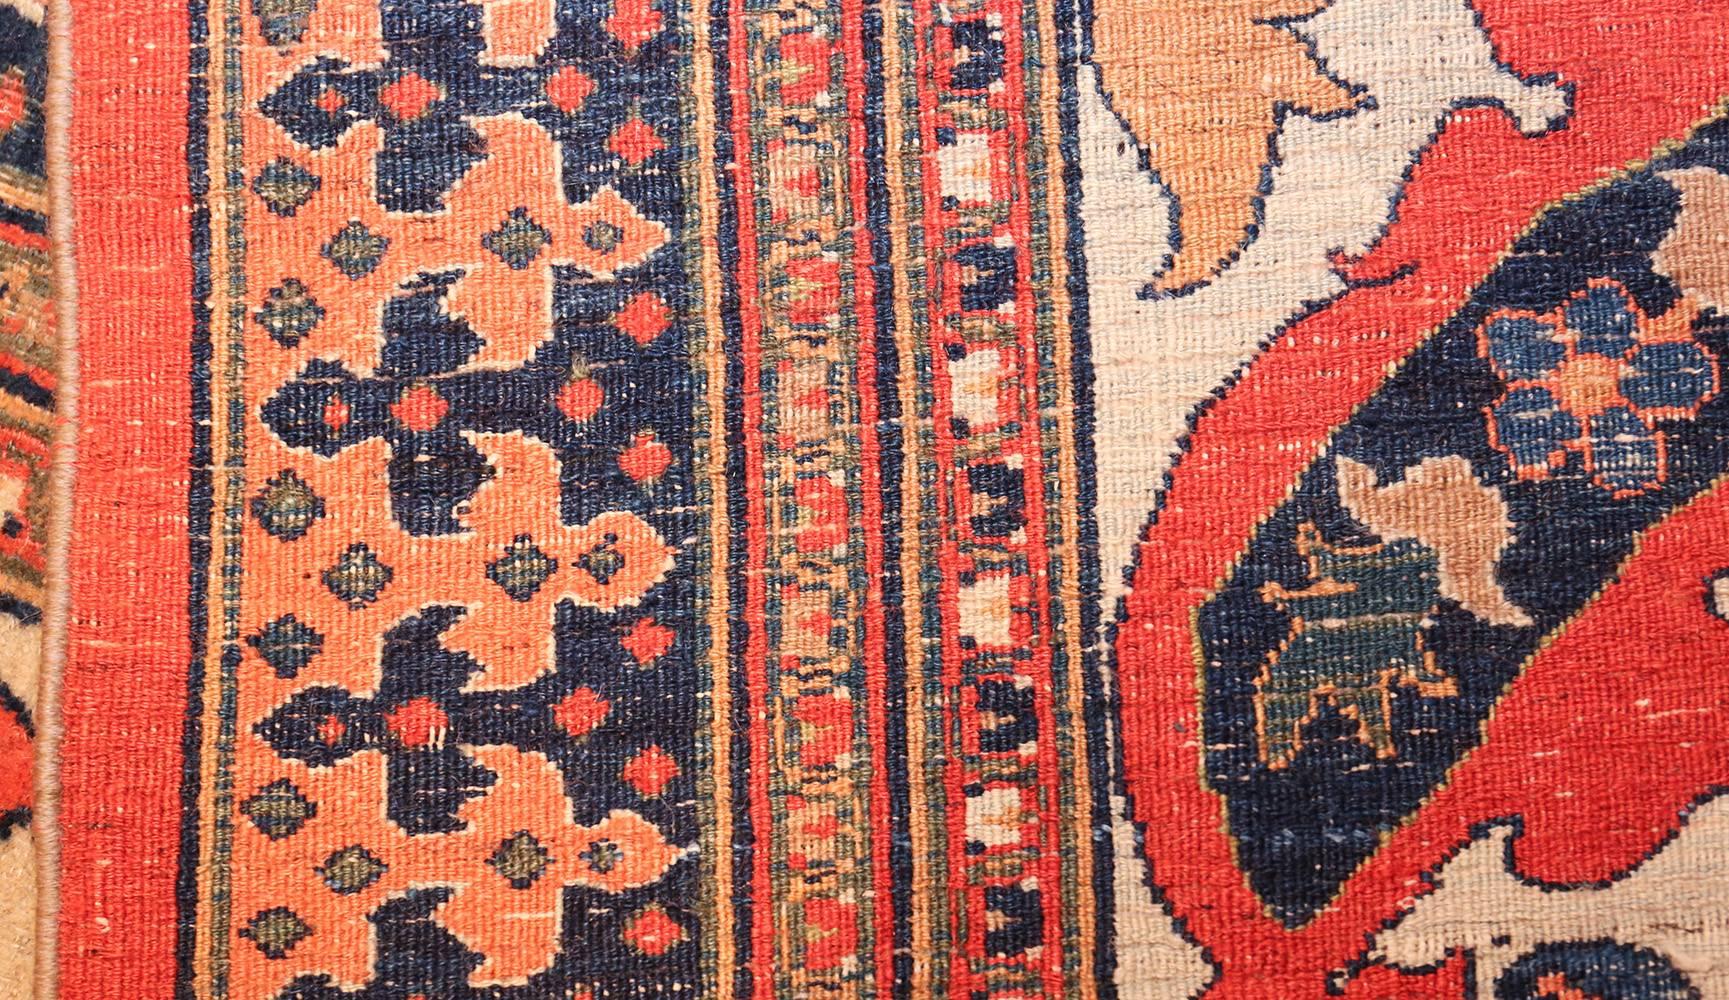 20th Century Antique Persian Khorassan Carpet. Size: 9 ft 10 in x 13 ft 9 in (3 m x 4.19 m)